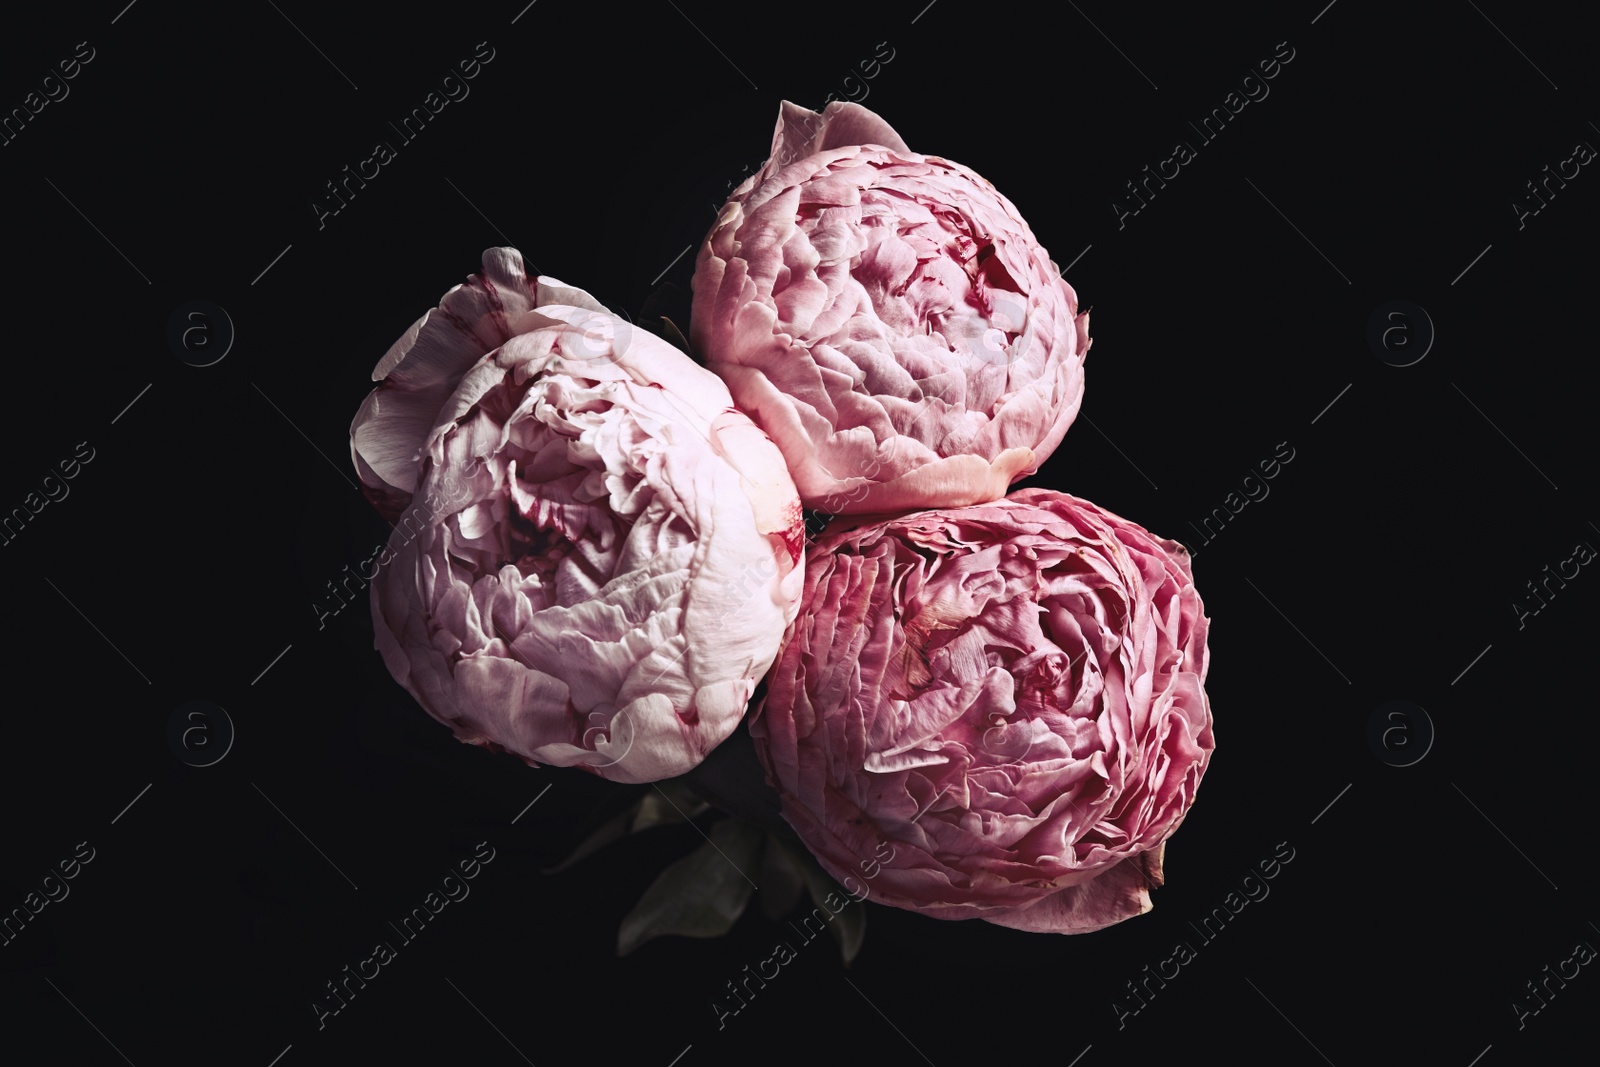 Photo of Beautiful fresh peonies on black background. Floral card design with dark vintage effect